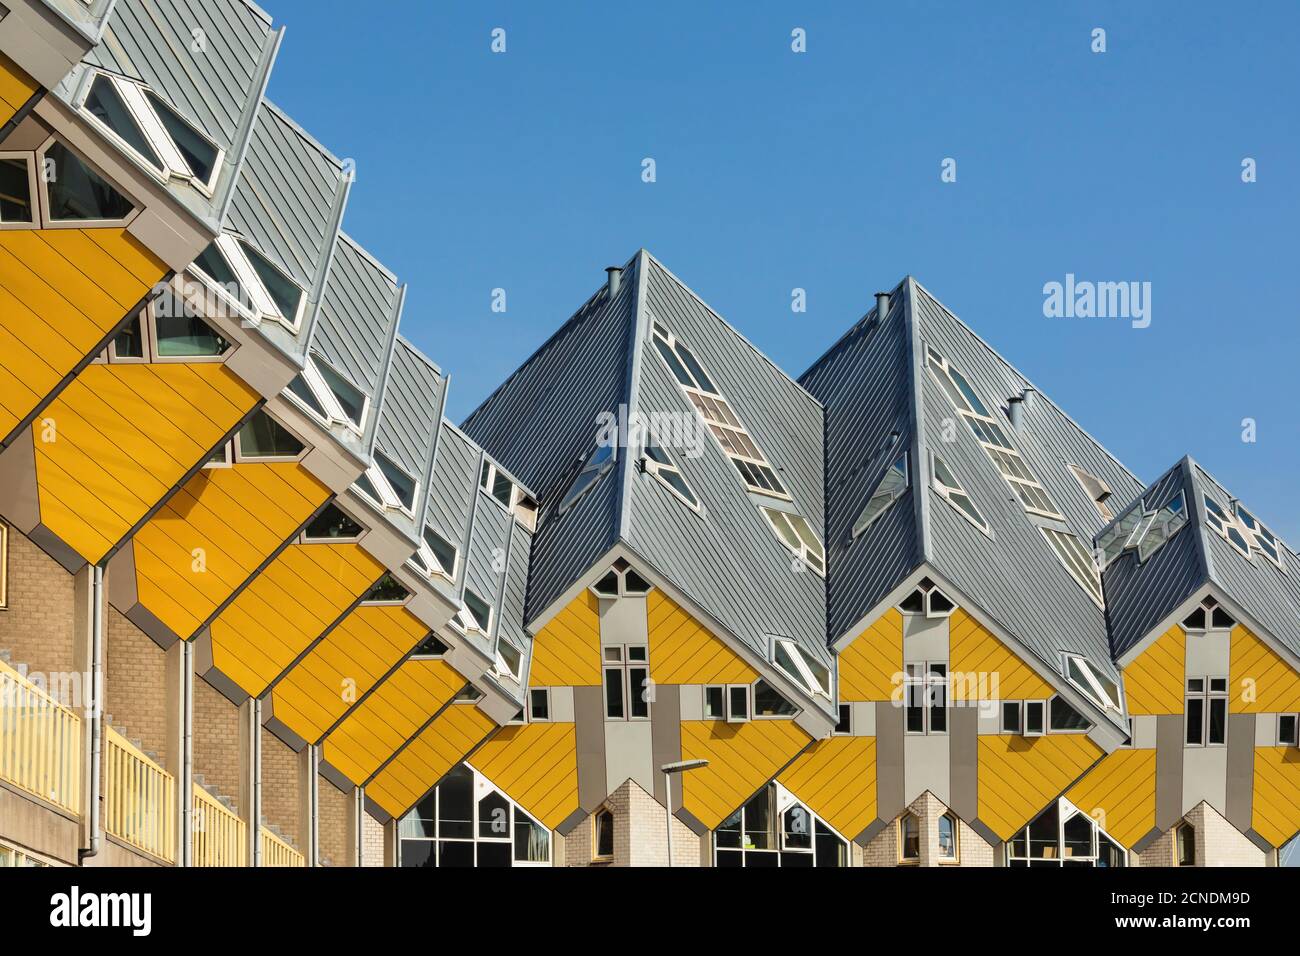 Cubic houses, Architect Piet Blom, Rotterdam, South Holland, Netherlands, Europe Stock Photo